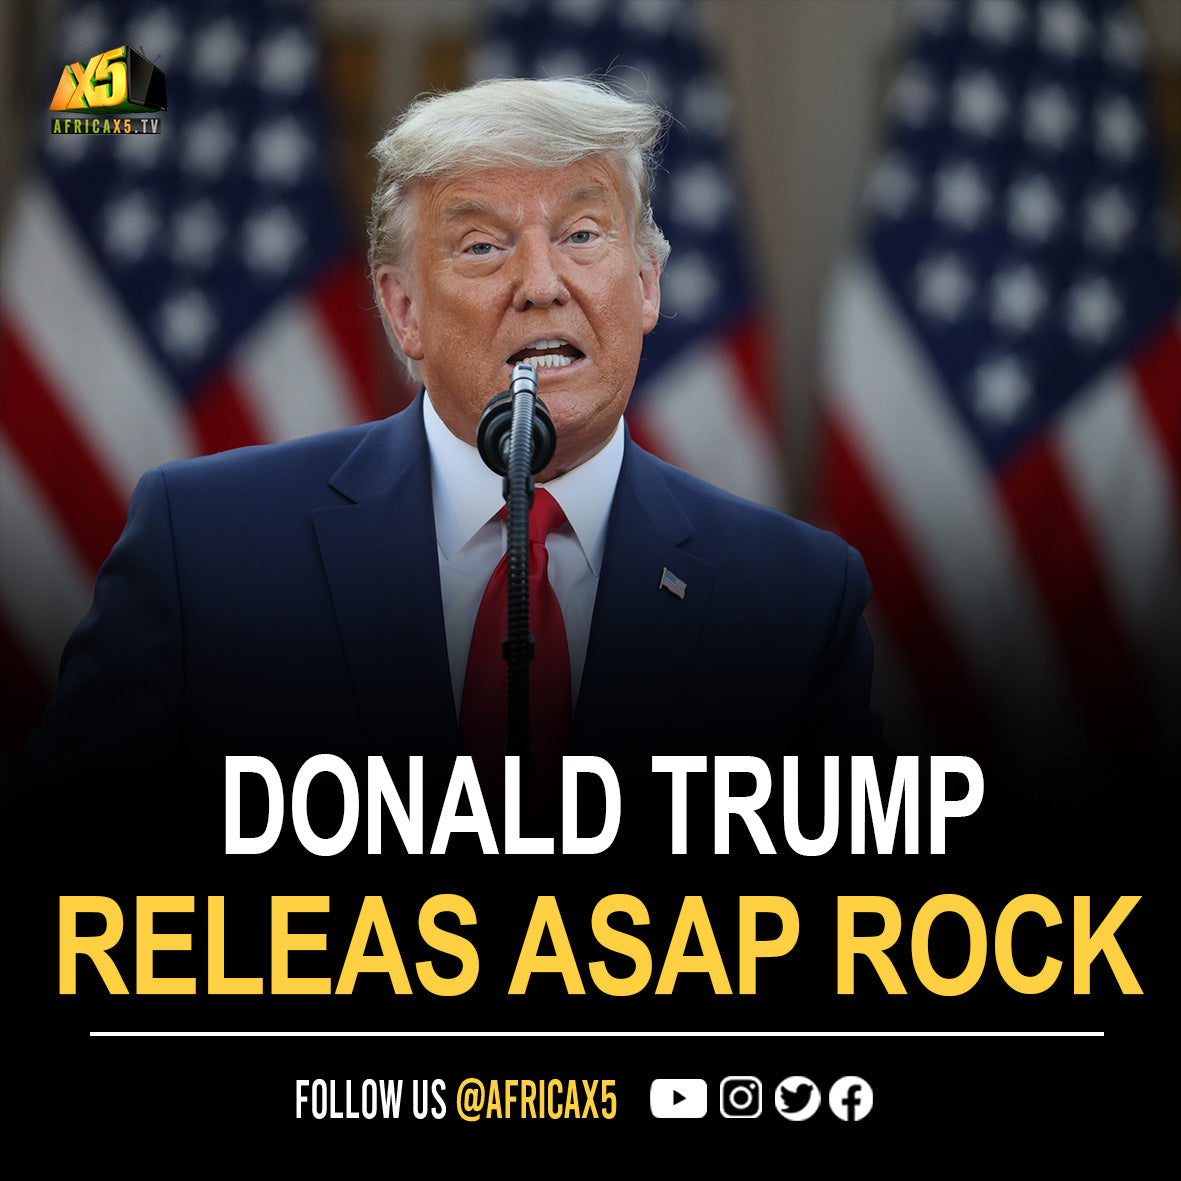 Donald Trump called for Sweden to release ASAP Rocky in 2019